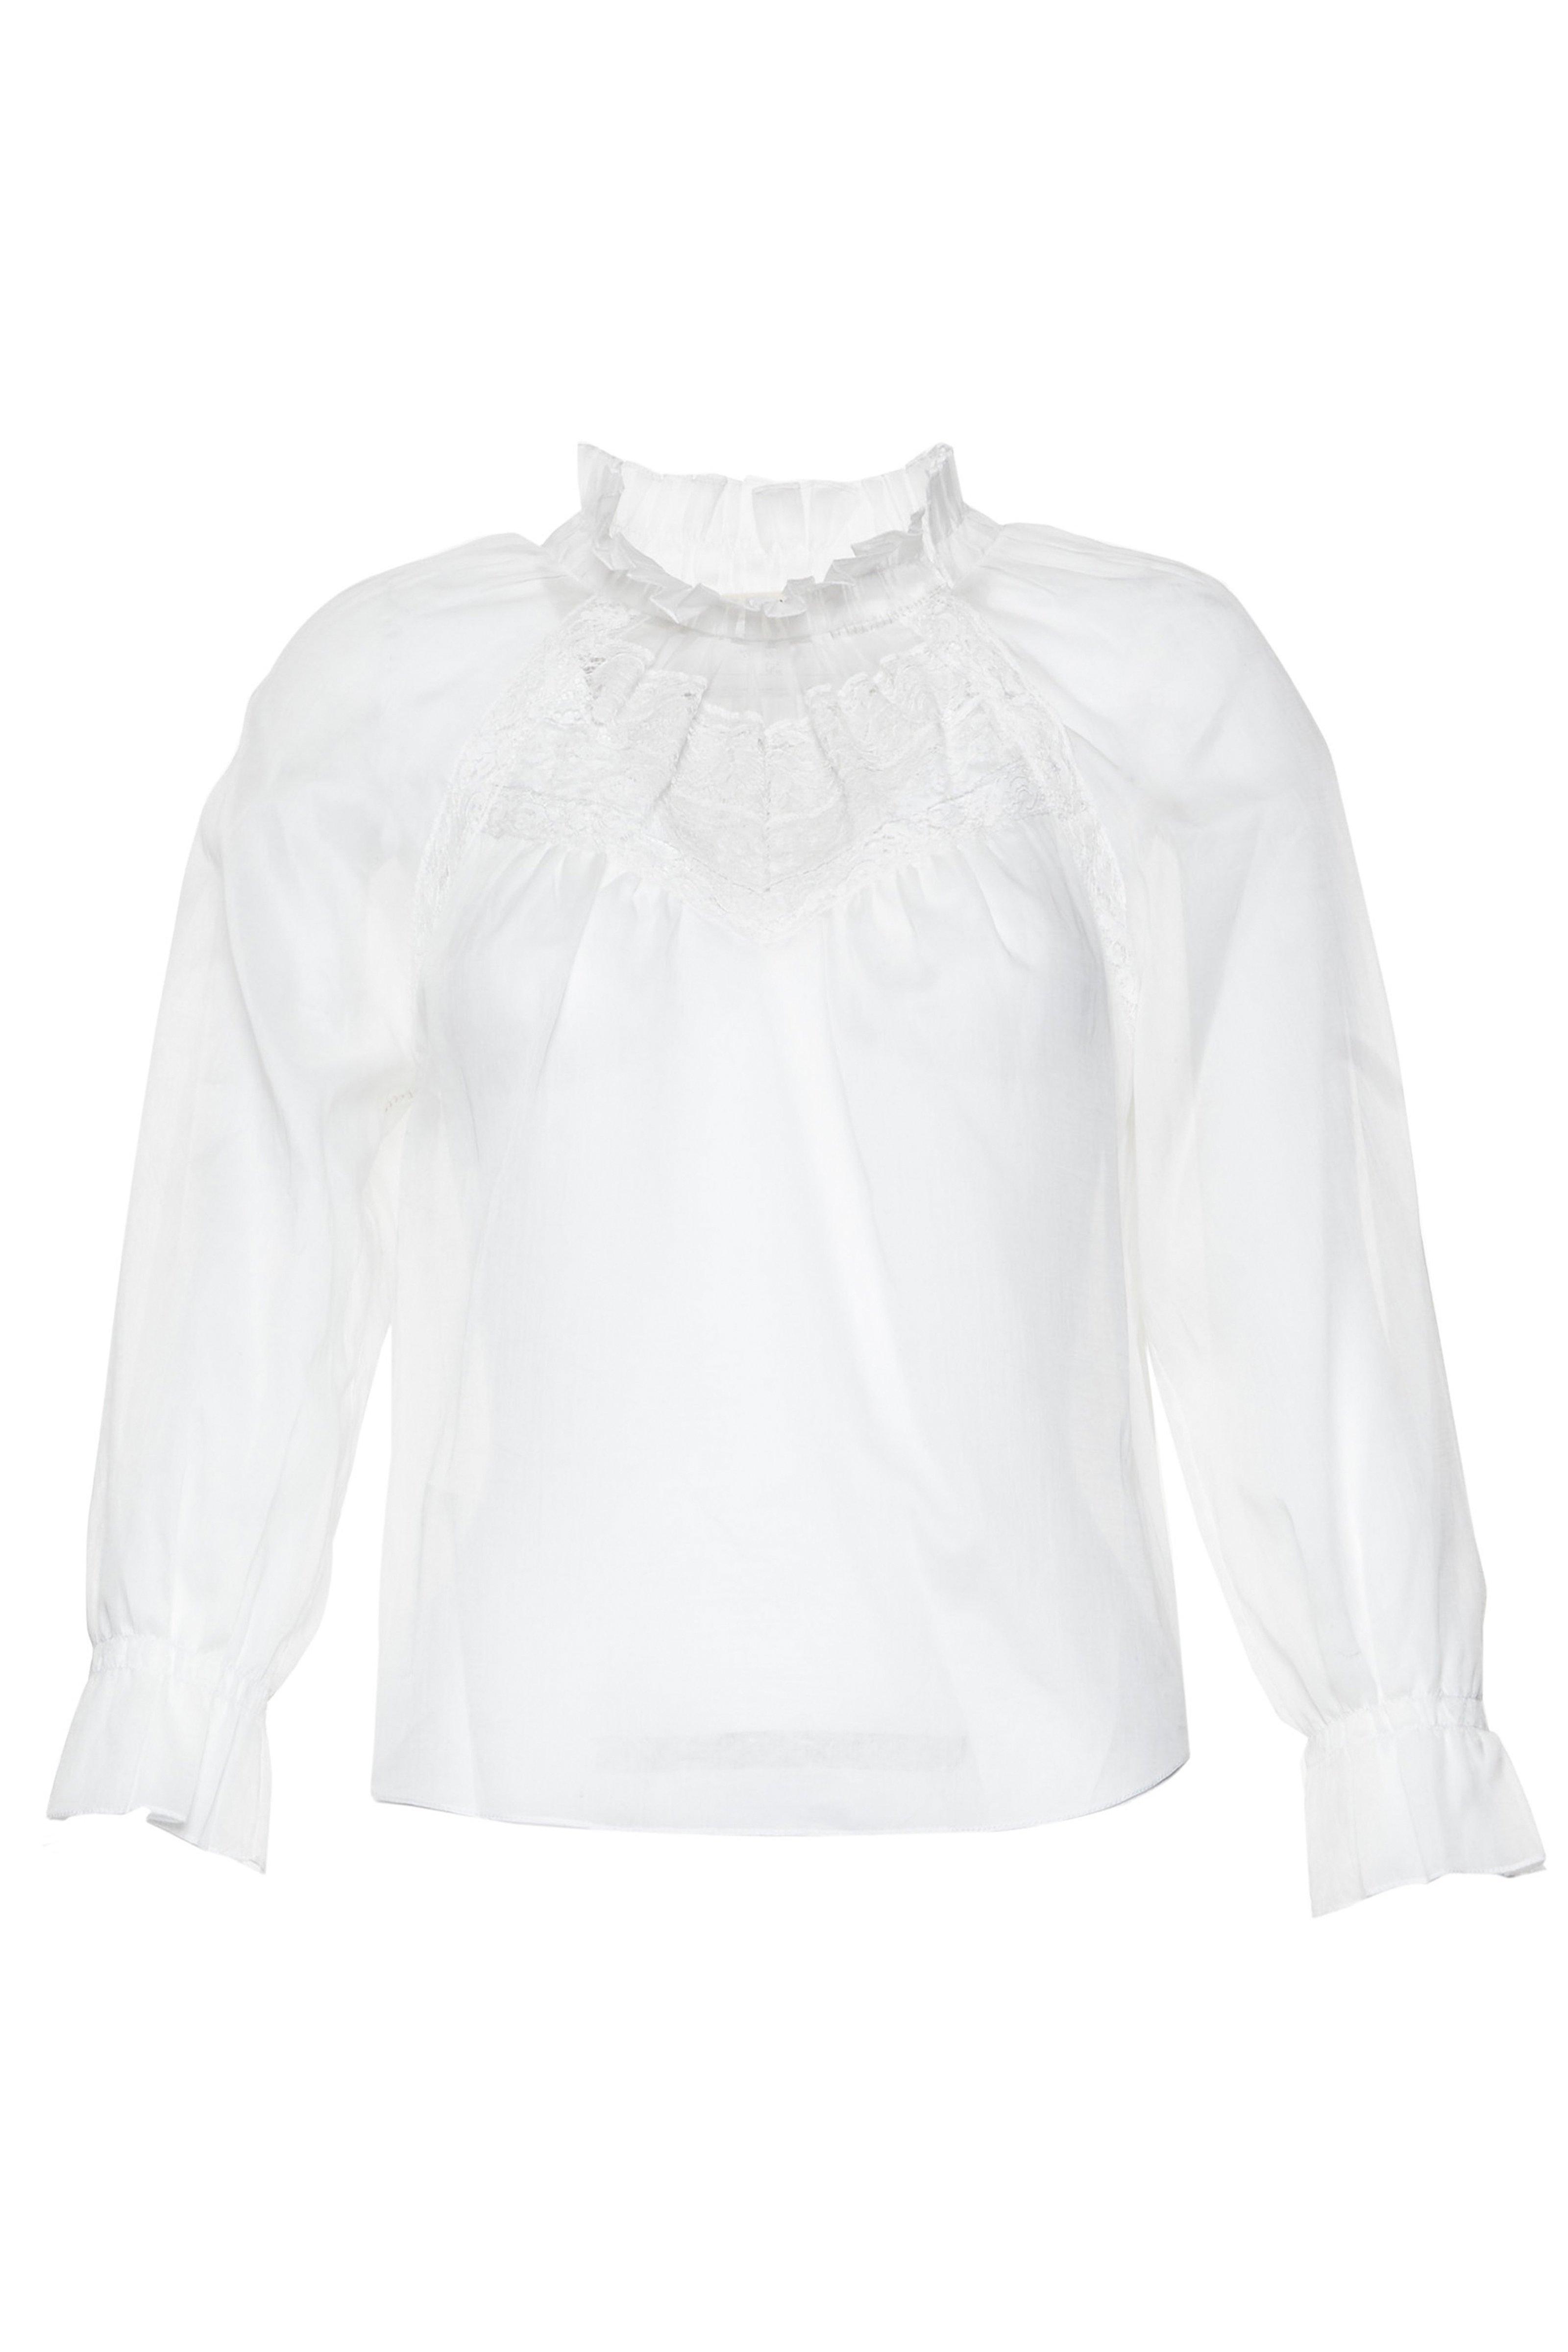 Marc Jacobs Cotton Voile Long Sleeve Blouse In White | ModeSens